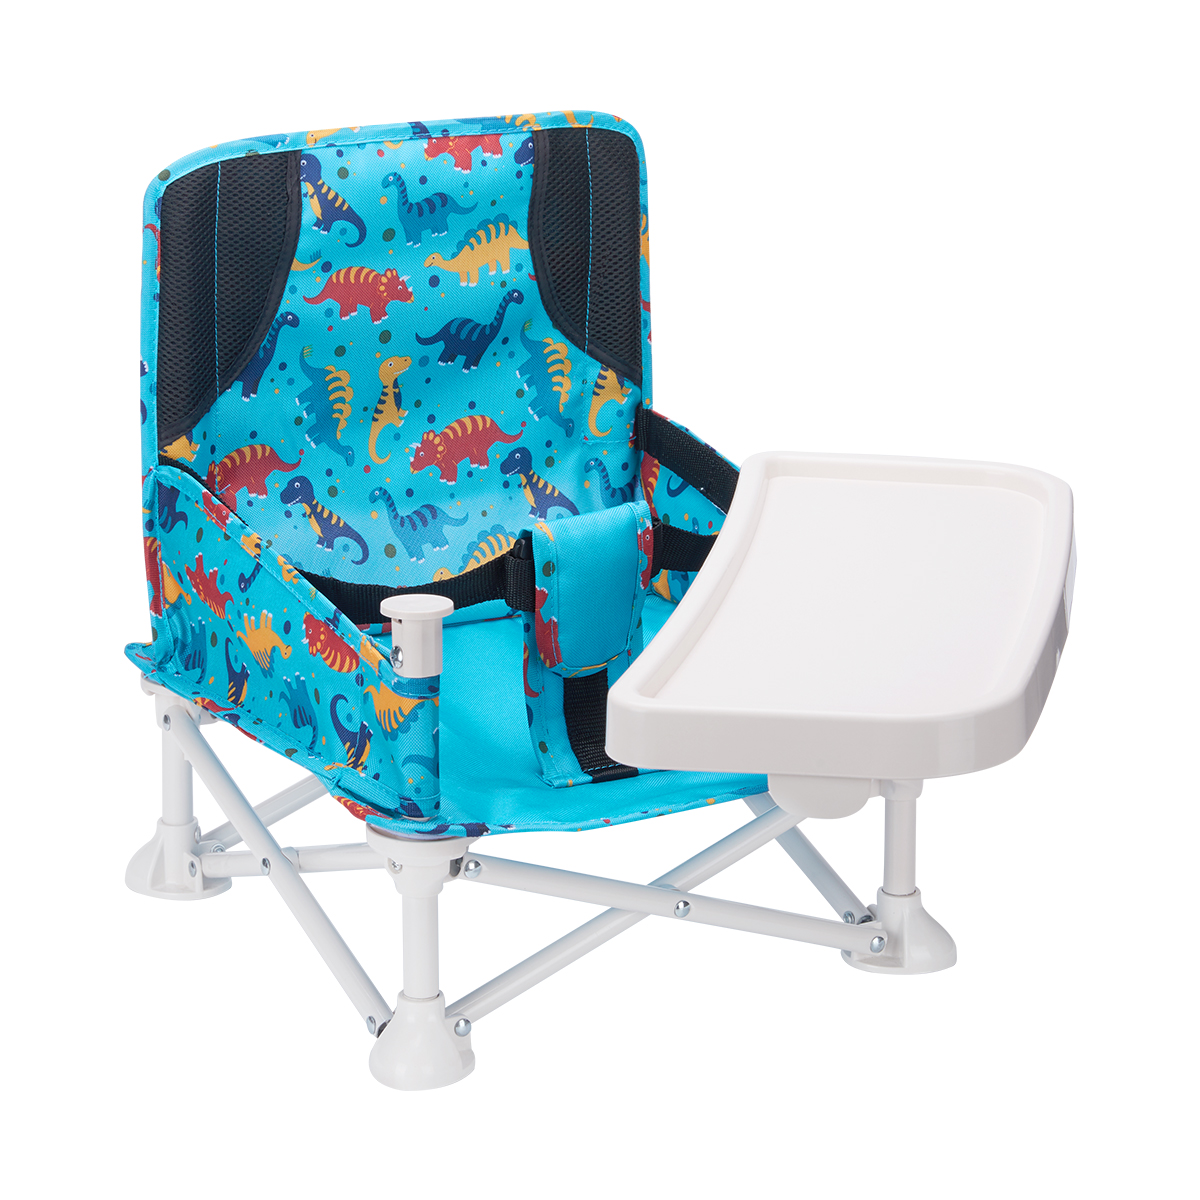 VEEYOO Travel Booster Seat With Removable Tray